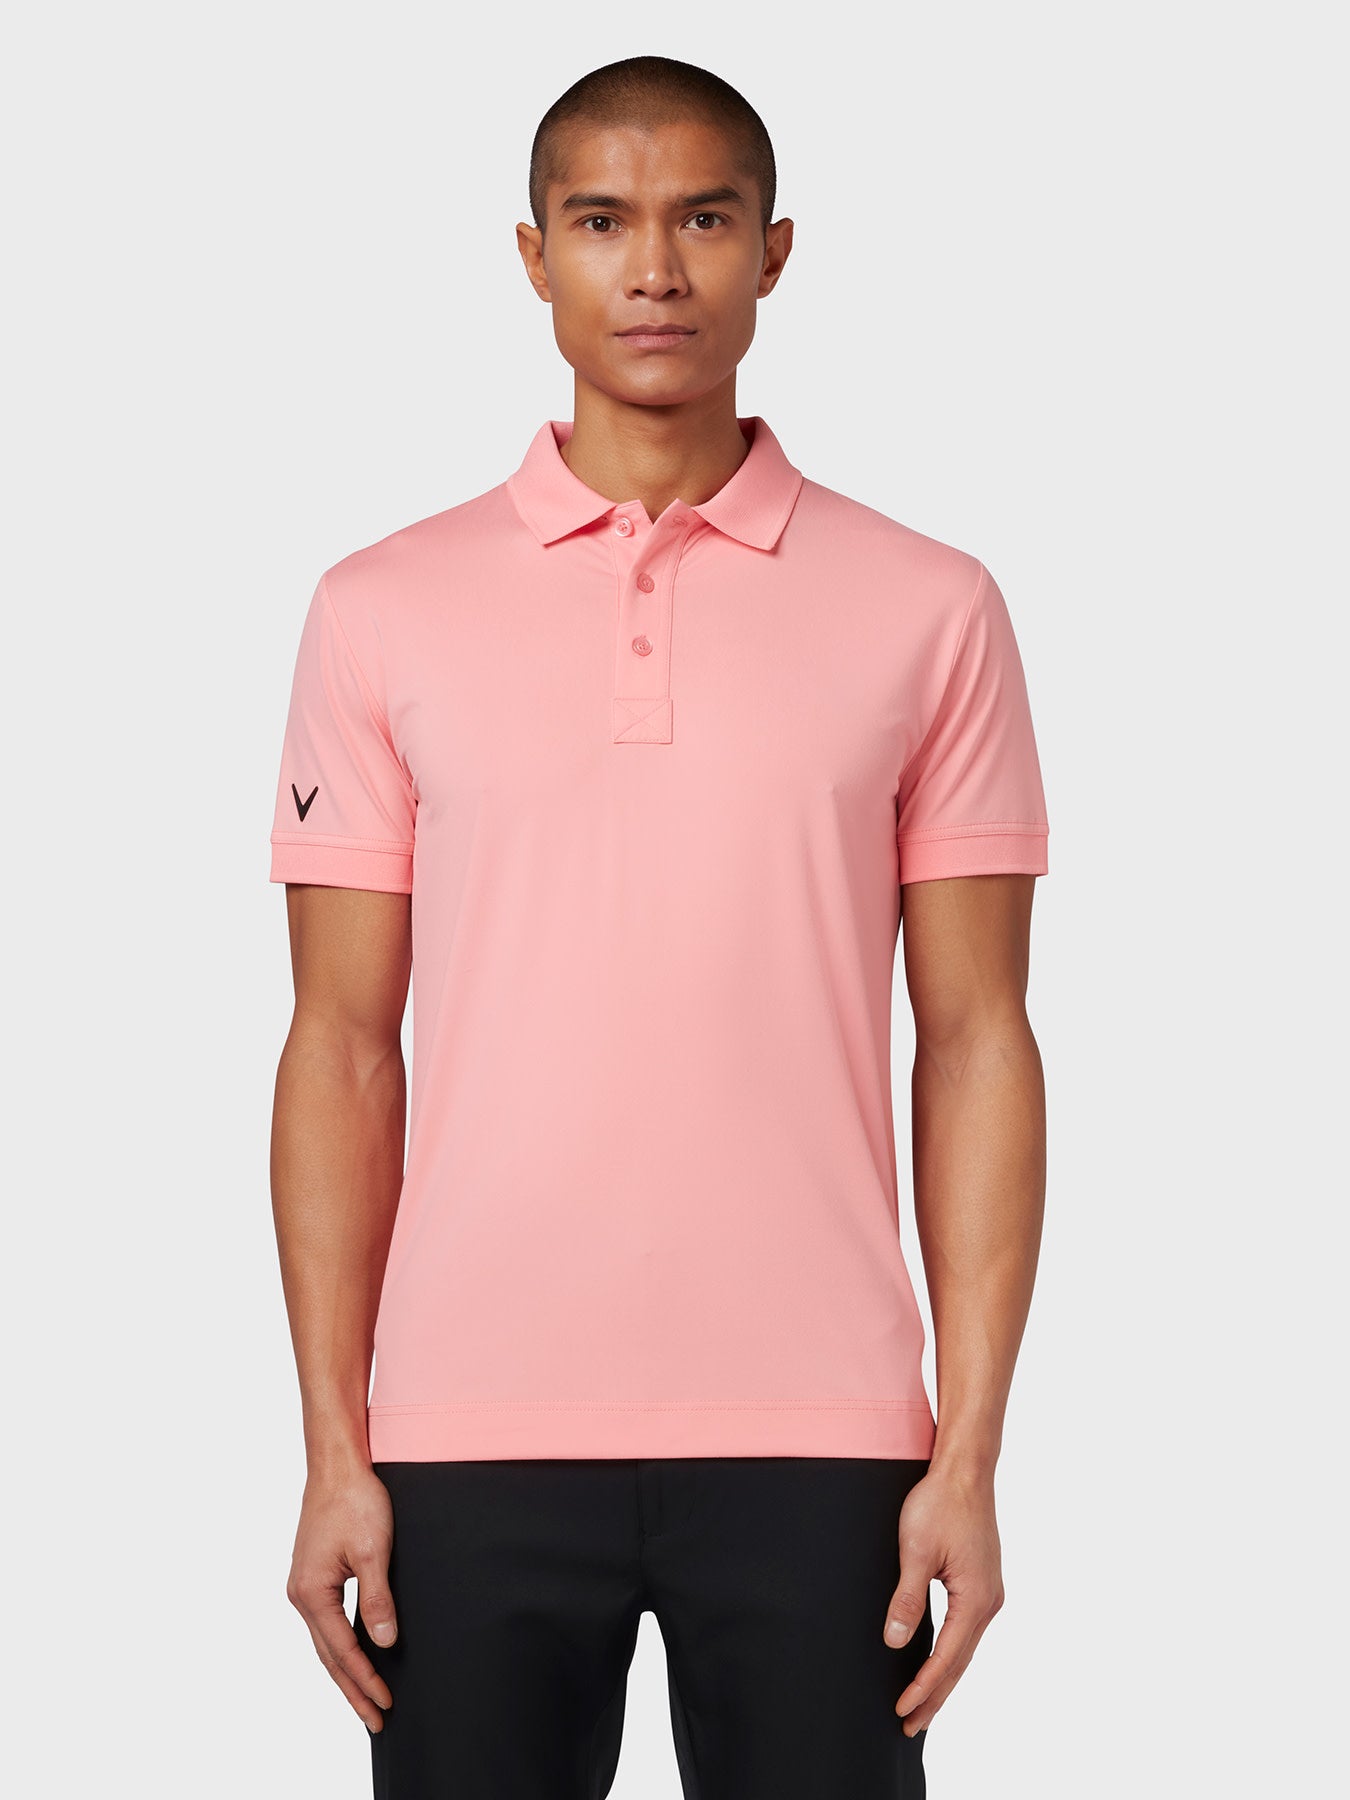 View X Series Solid Ribbed Polo In Geranium Pink information